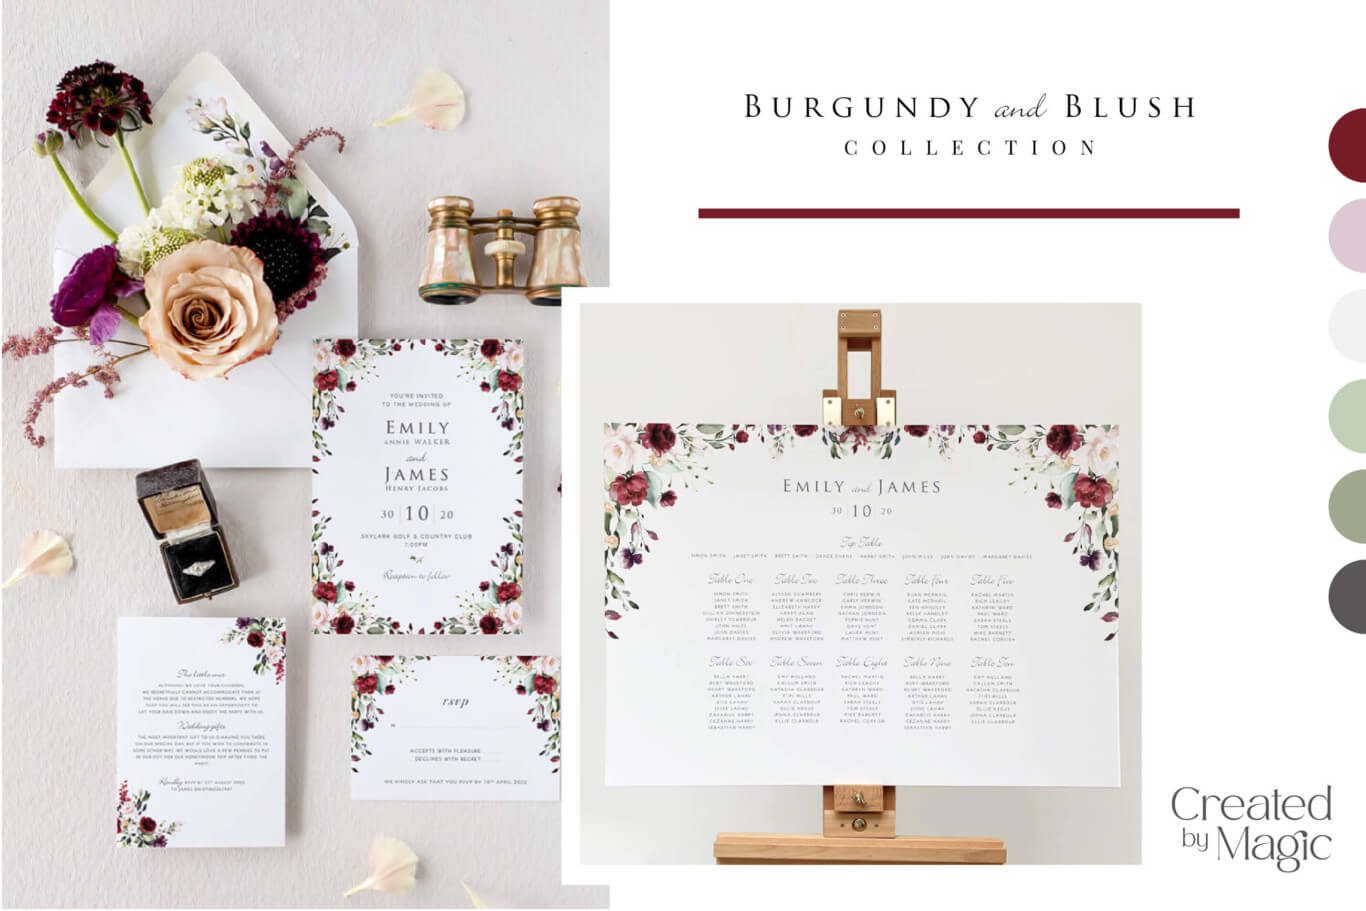 Burgundy and Blush wedding invitations collection